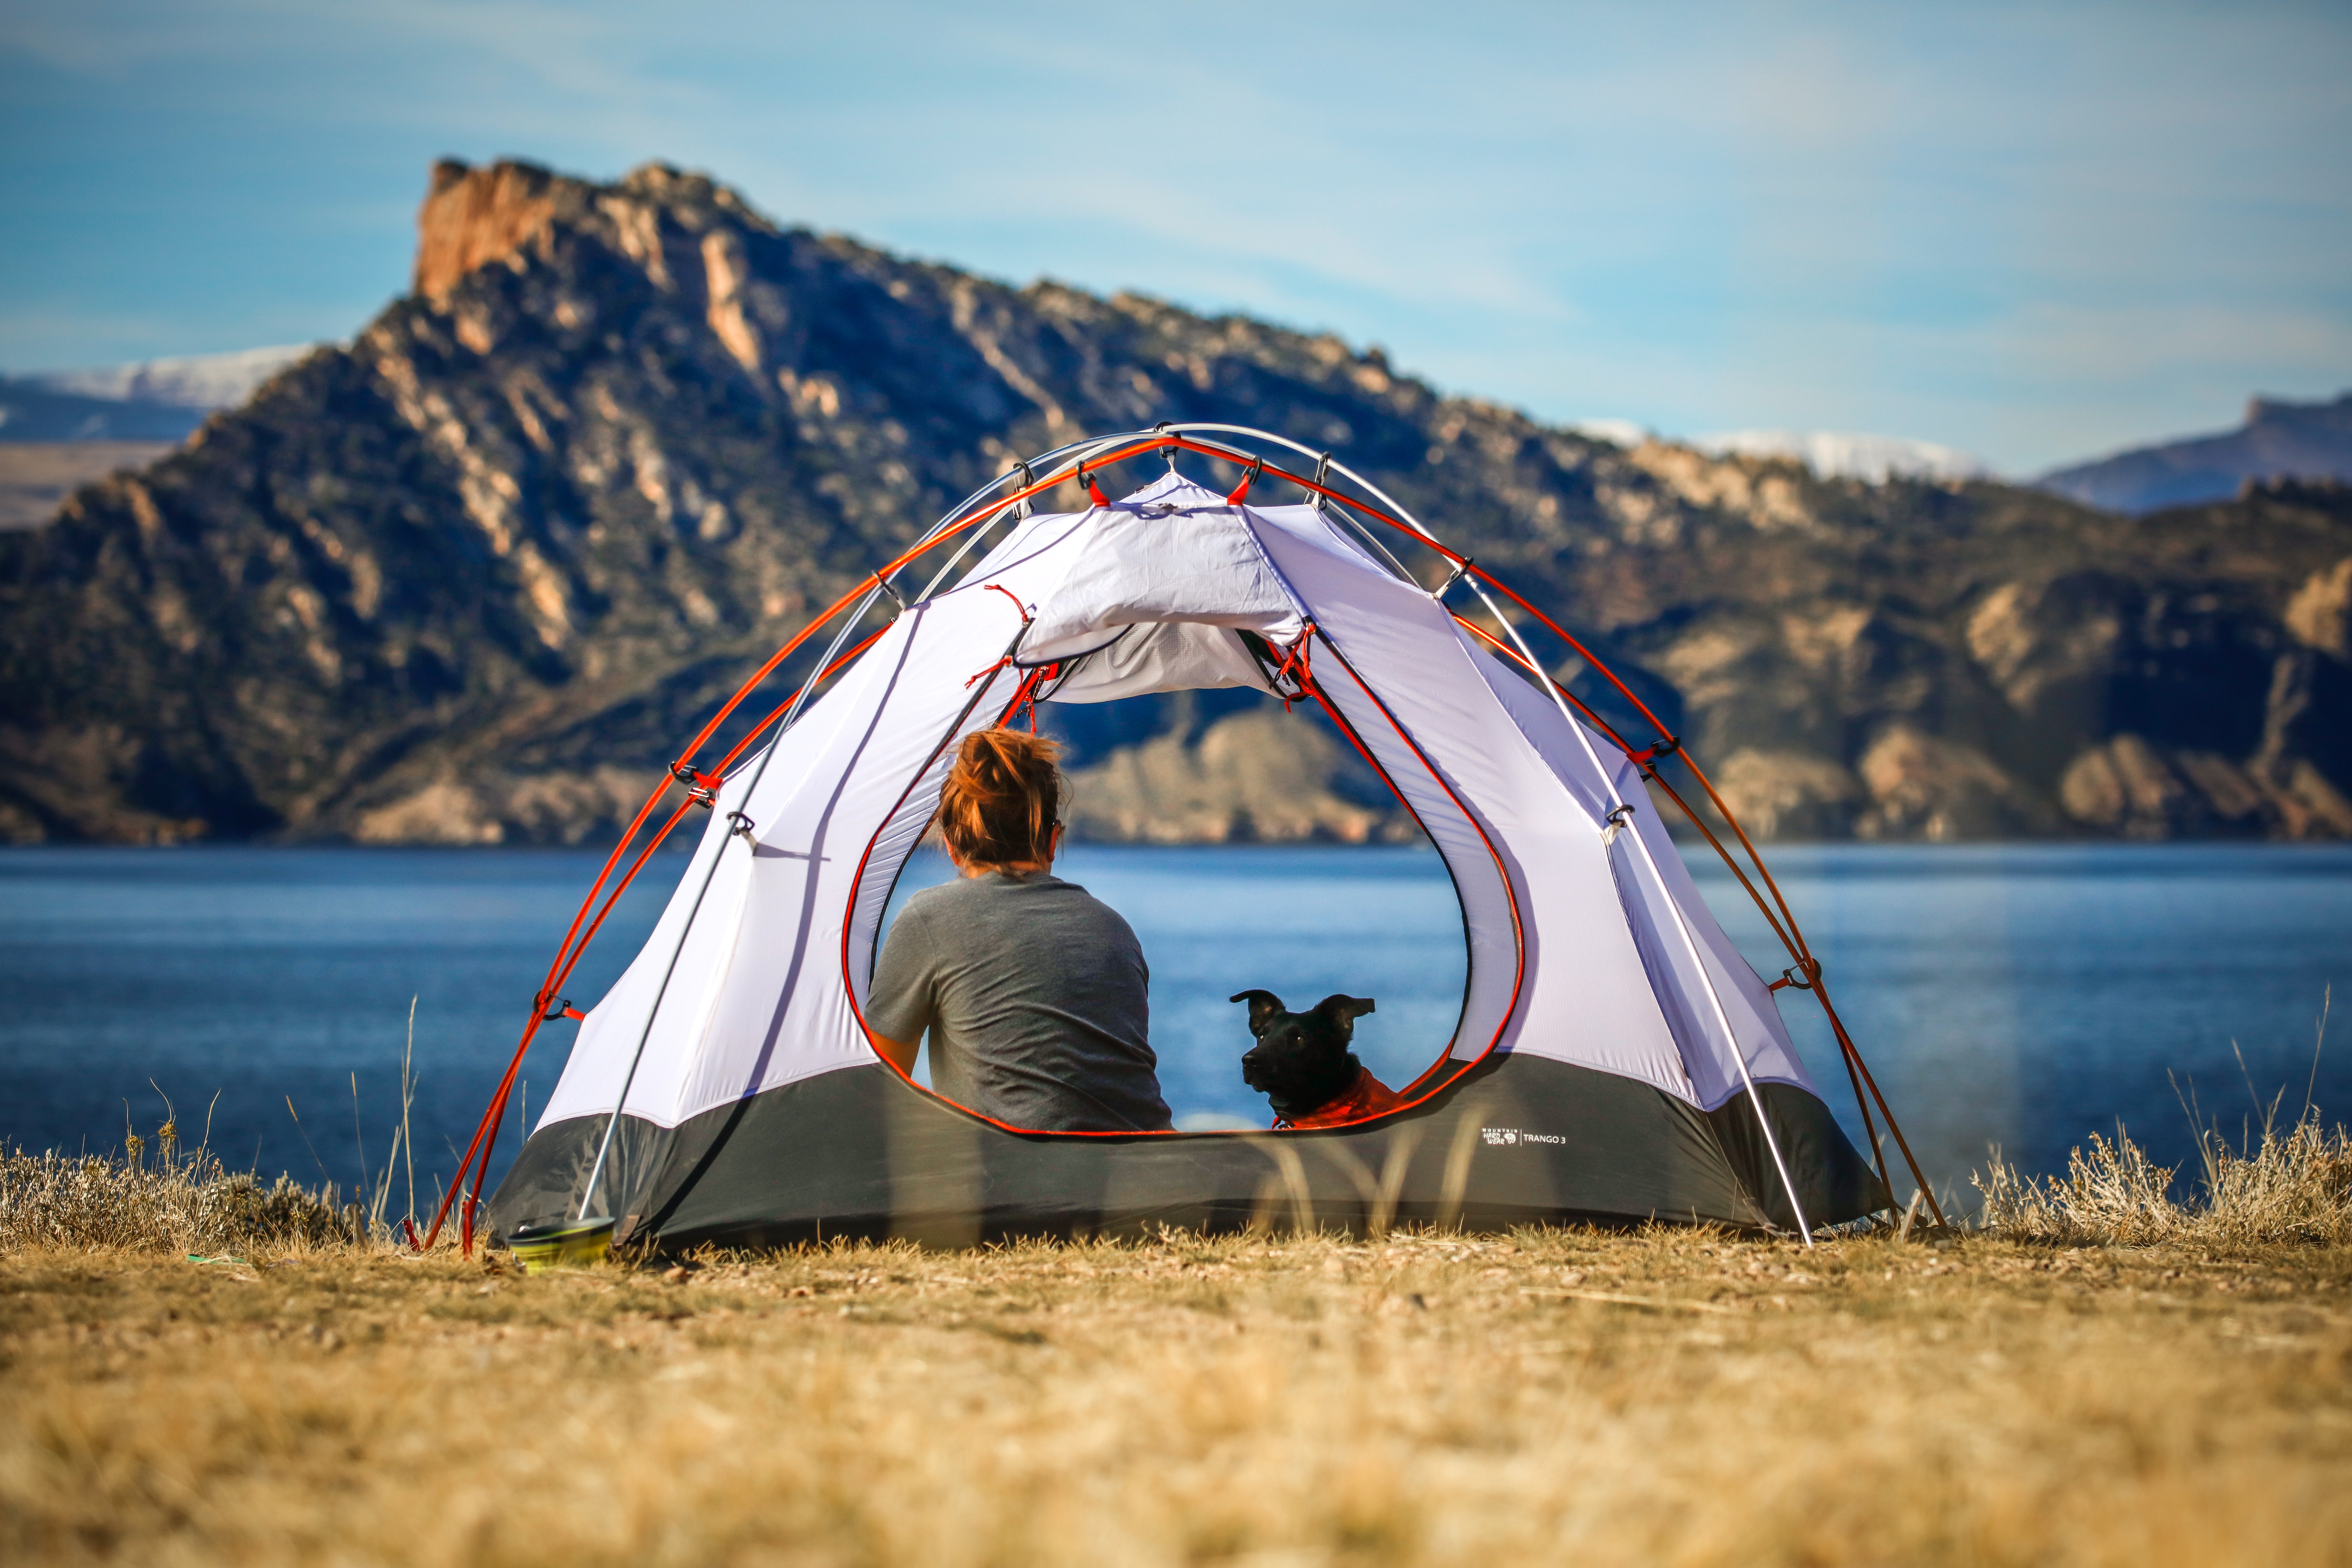 How to Camp with Your Pet - Fairfield Residential8192 x 5461